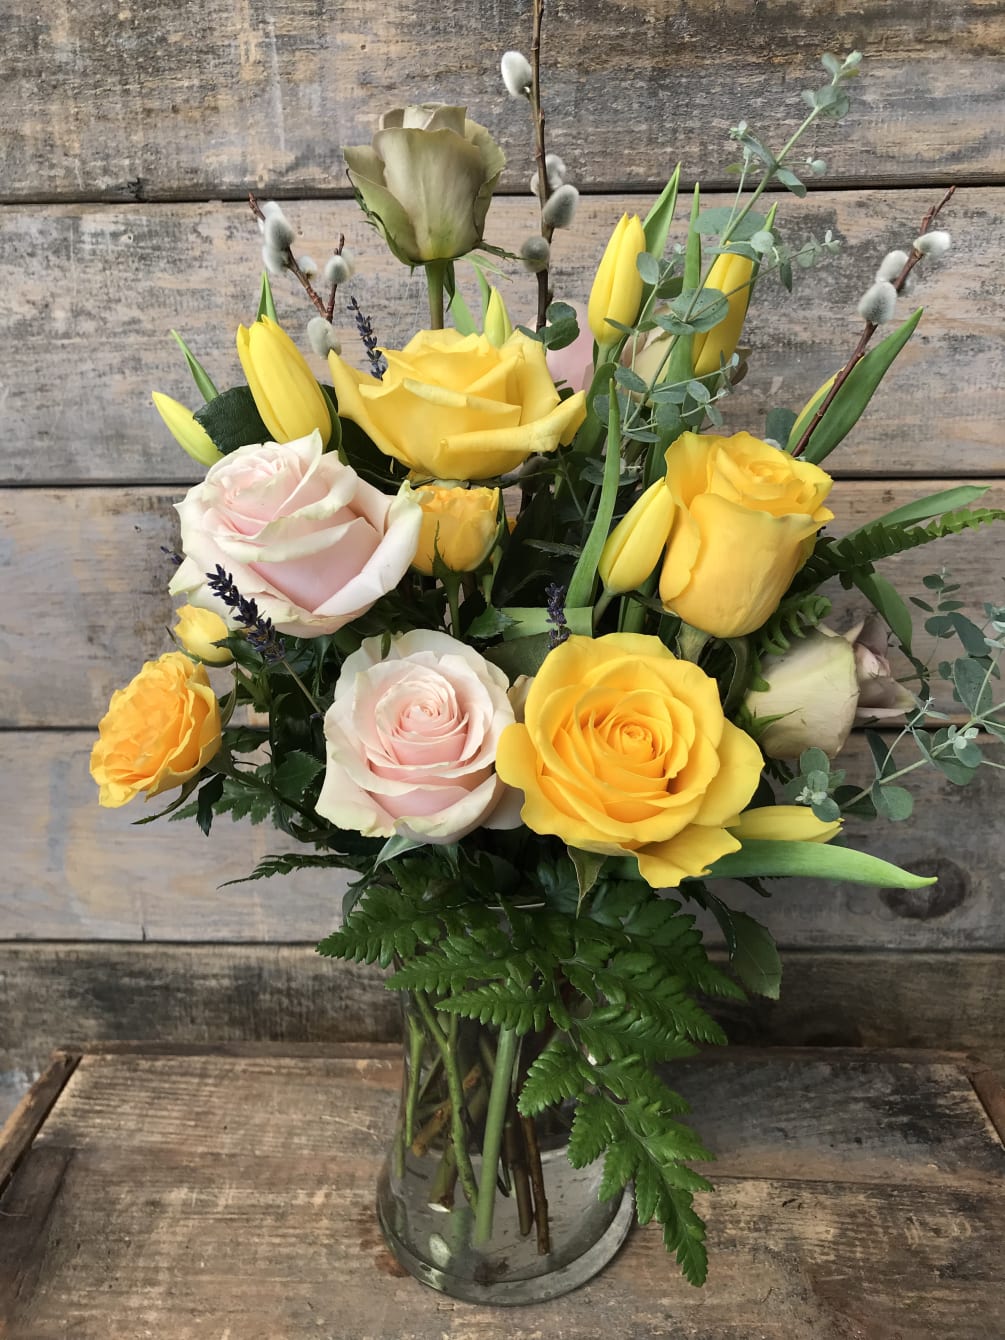 Our artisan handmade arrangement&#039;s overall theme is shades of yellow. The actual